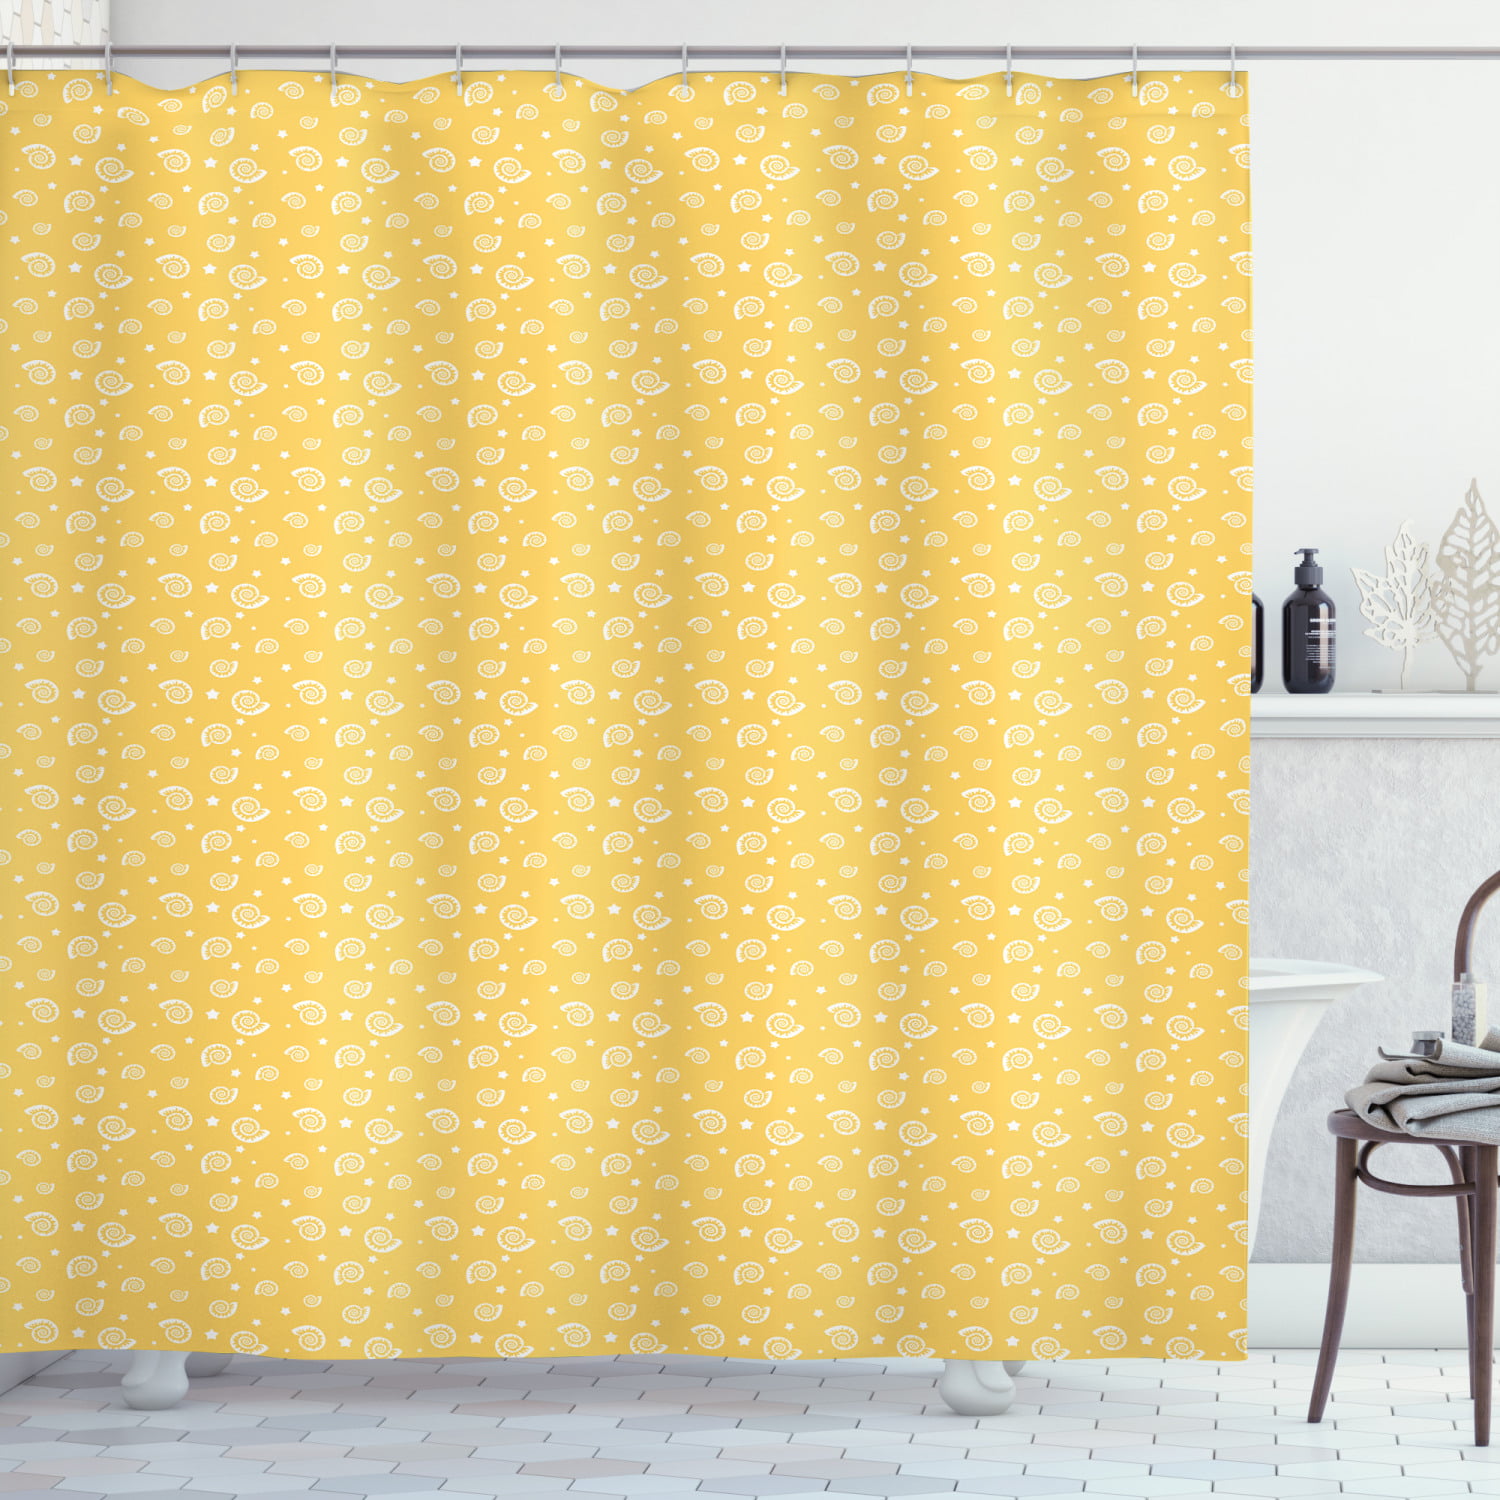 Details about  / Gecko Yellow Nice Black 3D Shower Curtain Waterproof Fabric Bathroom Decoration